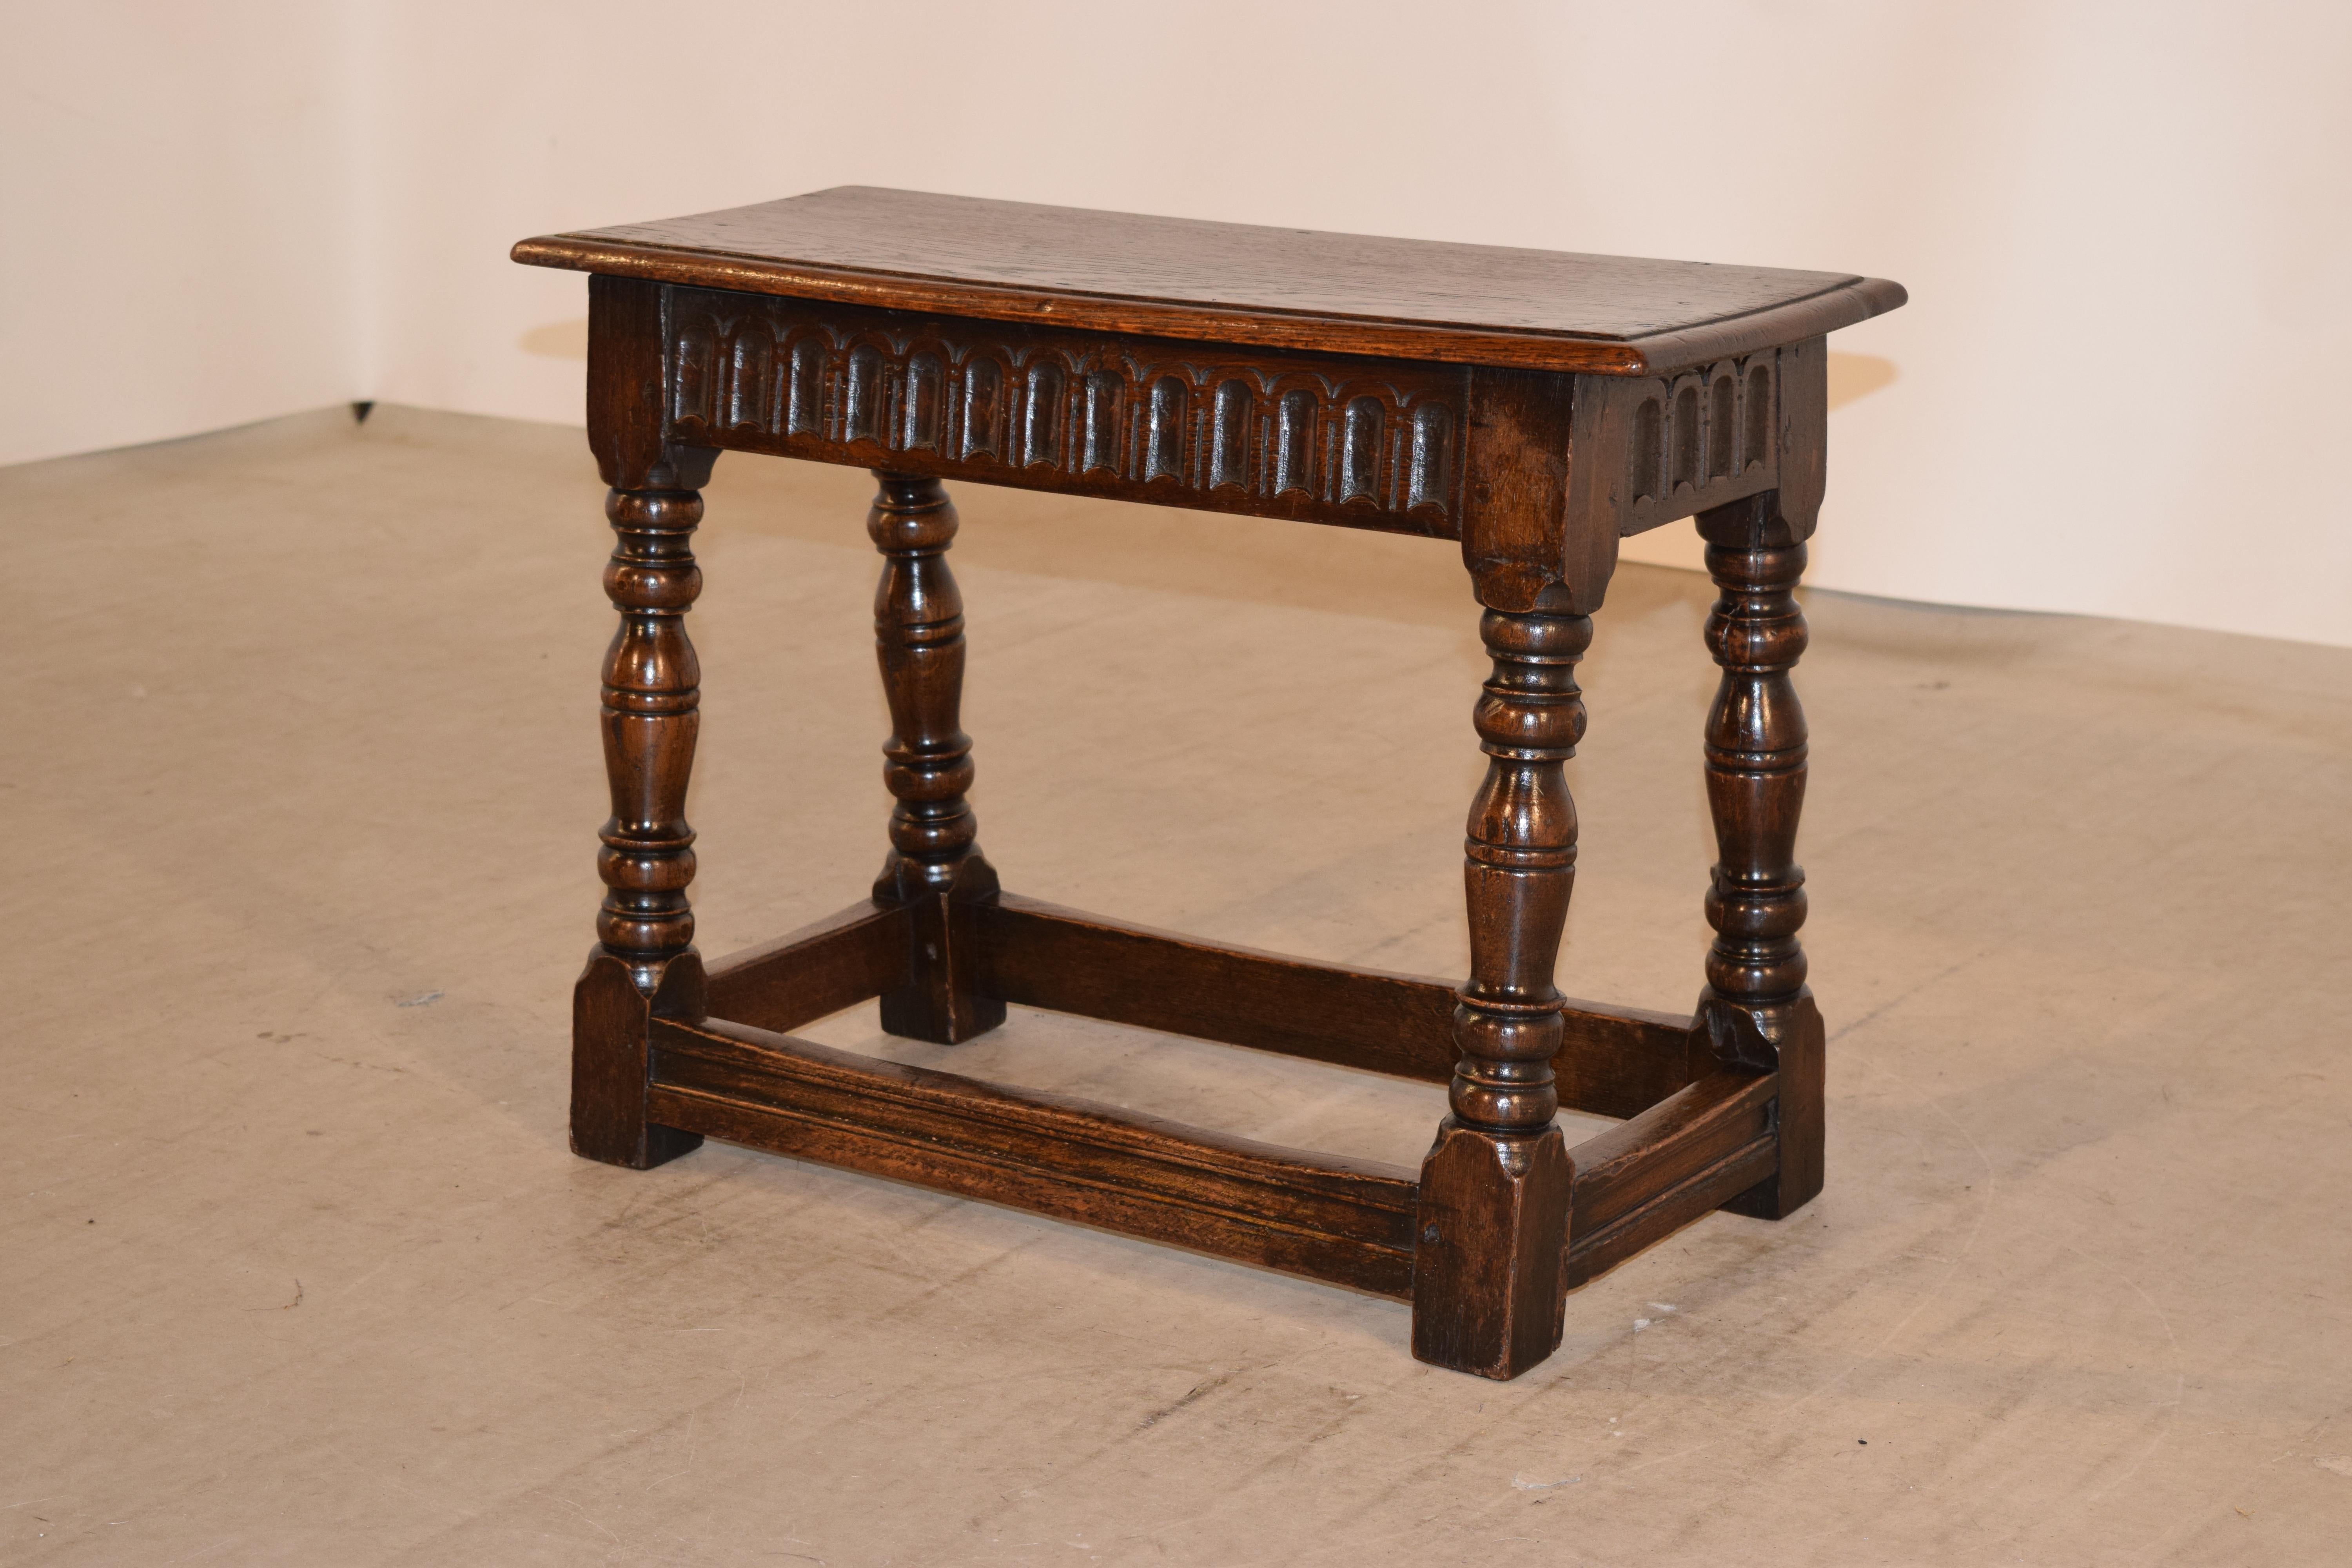 19th century large English oak stool with a beveled edge around the pegged top, following down to a hand carved decorated fluted apron and supported on splayed hand-turned legs, joined by routed stretchers. Seat depth is 10.25 inches.